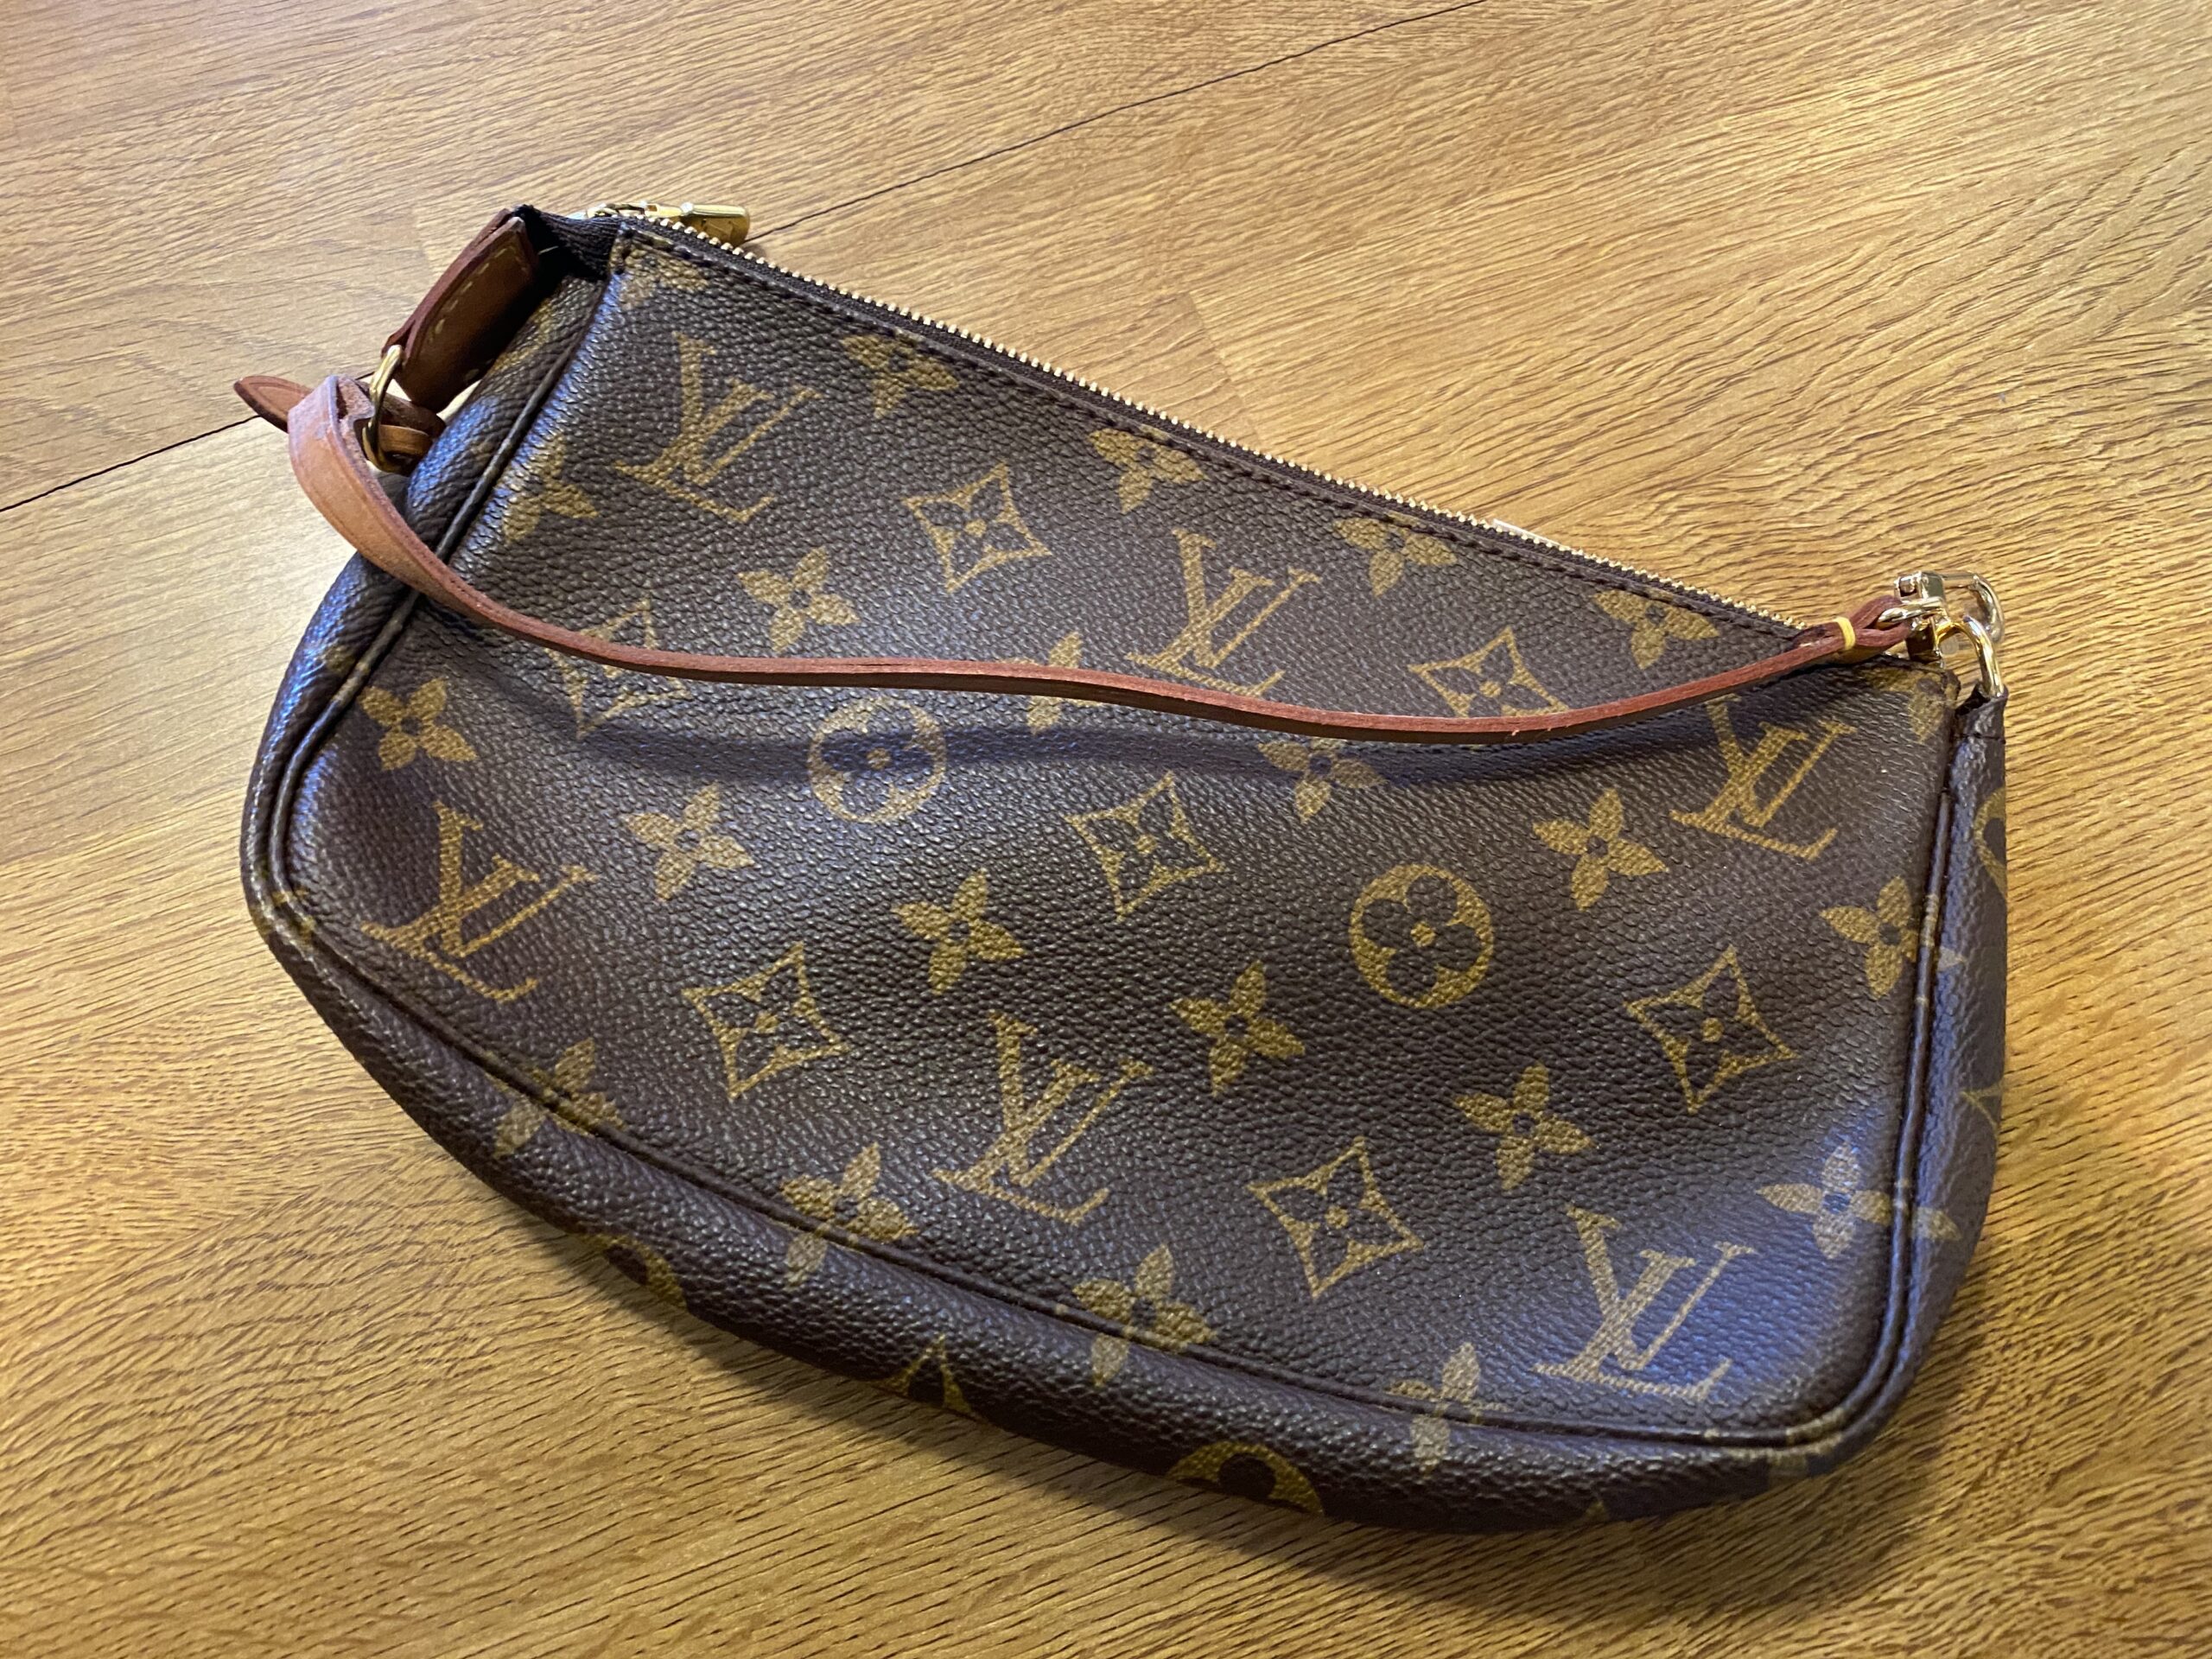 SALE／63%OFF】 LOUIS VUITTON ルイ ヴィトン モノグラム ポシェット 